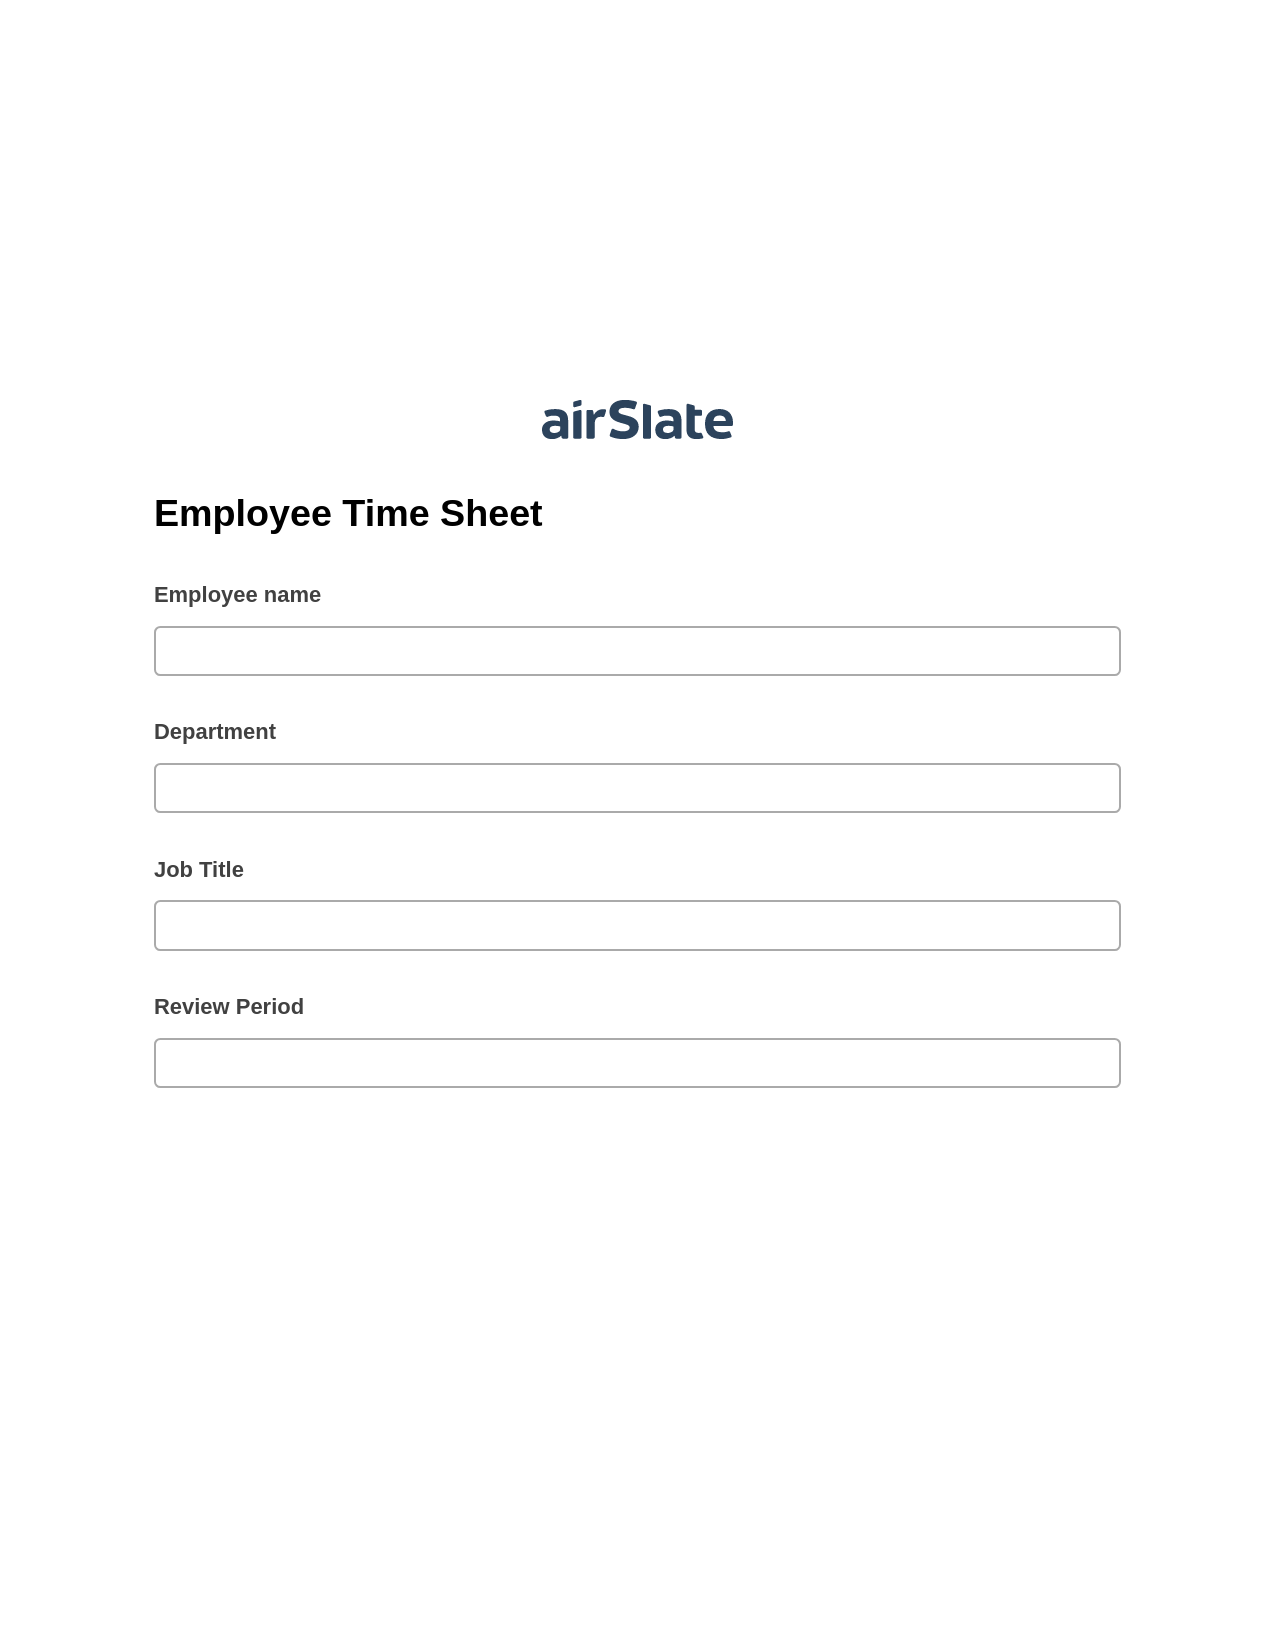 Employee Time Sheet Pre-fill Dropdowns from Excel Bot, Update MS Dynamics 365 Record Bot, Export to MySQL Bot